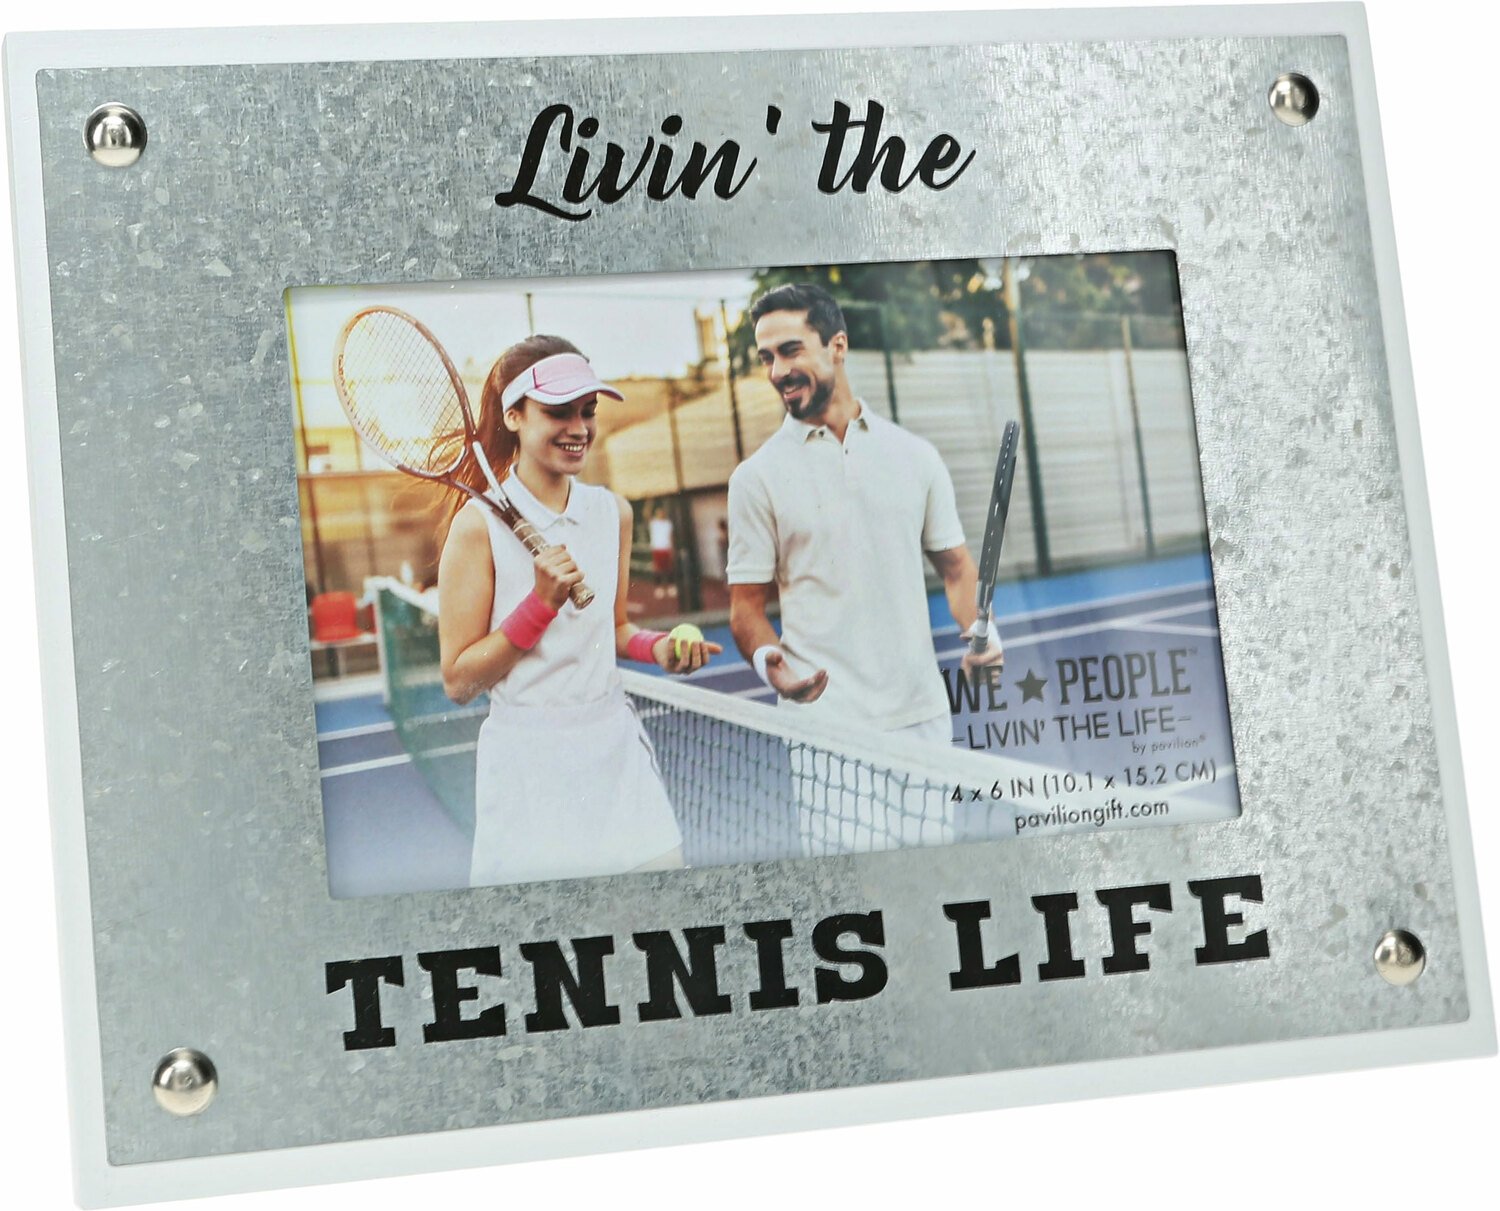 Tennis Life by We People - Tennis Life - 8.5" x 6.5" Frame
(Holds 4" x 6" Photo)